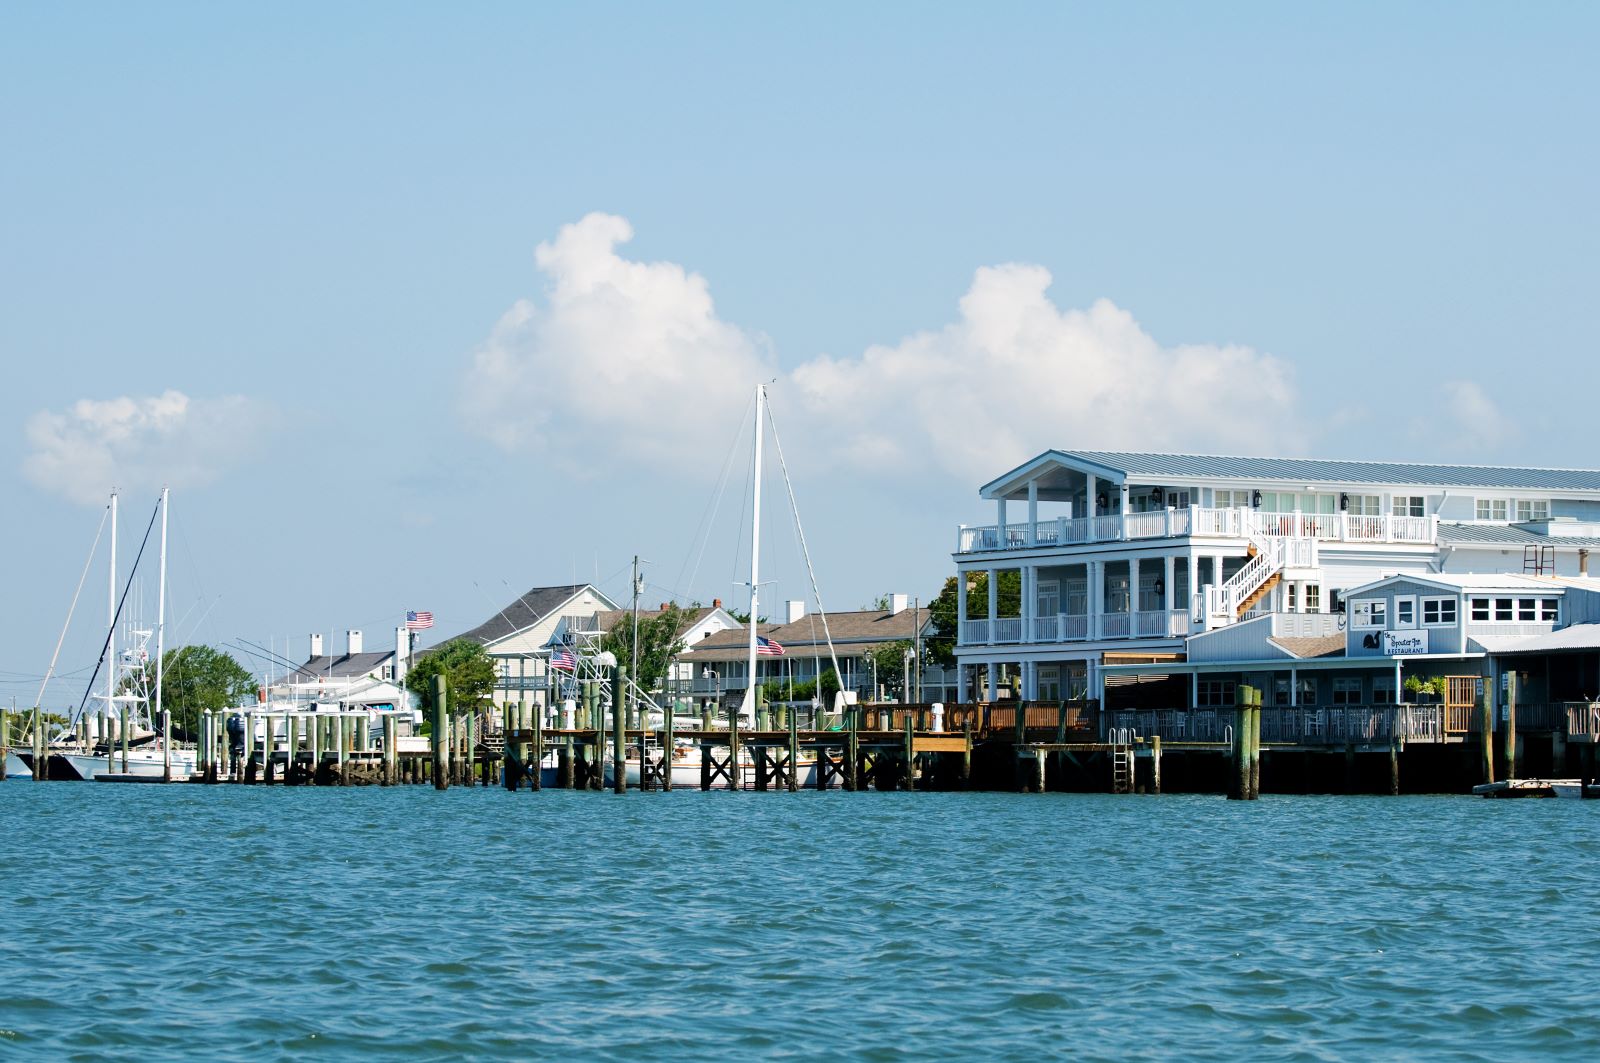 Image Credit: Shutterstock / LindaZ74 <p>Escape to Beaufort for a taste of Southern charm with fewer crowds and lower costs. This hidden gem offers easy access to pristine beaches and wild horse sightings without the commercial fluff. Perfect for a tranquil retreat that lets you connect with nature on a budget.</p>